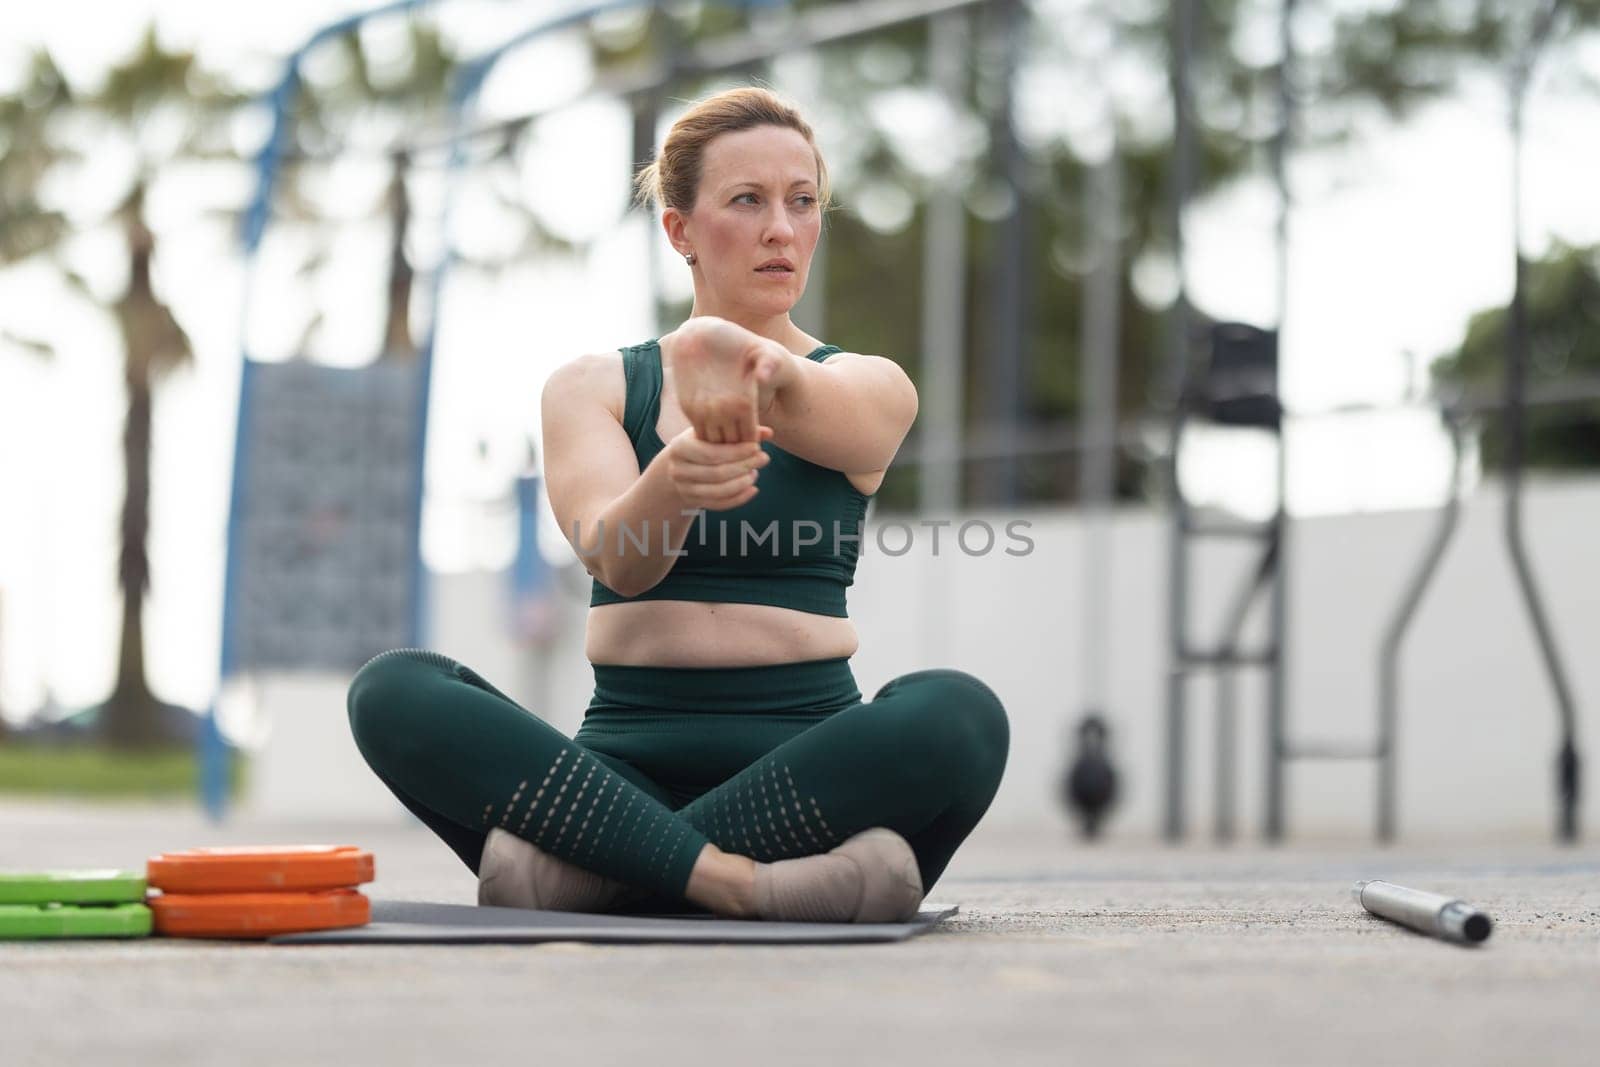 Adult athletic woman exercising outdoors - warming up her palm. Mid shot